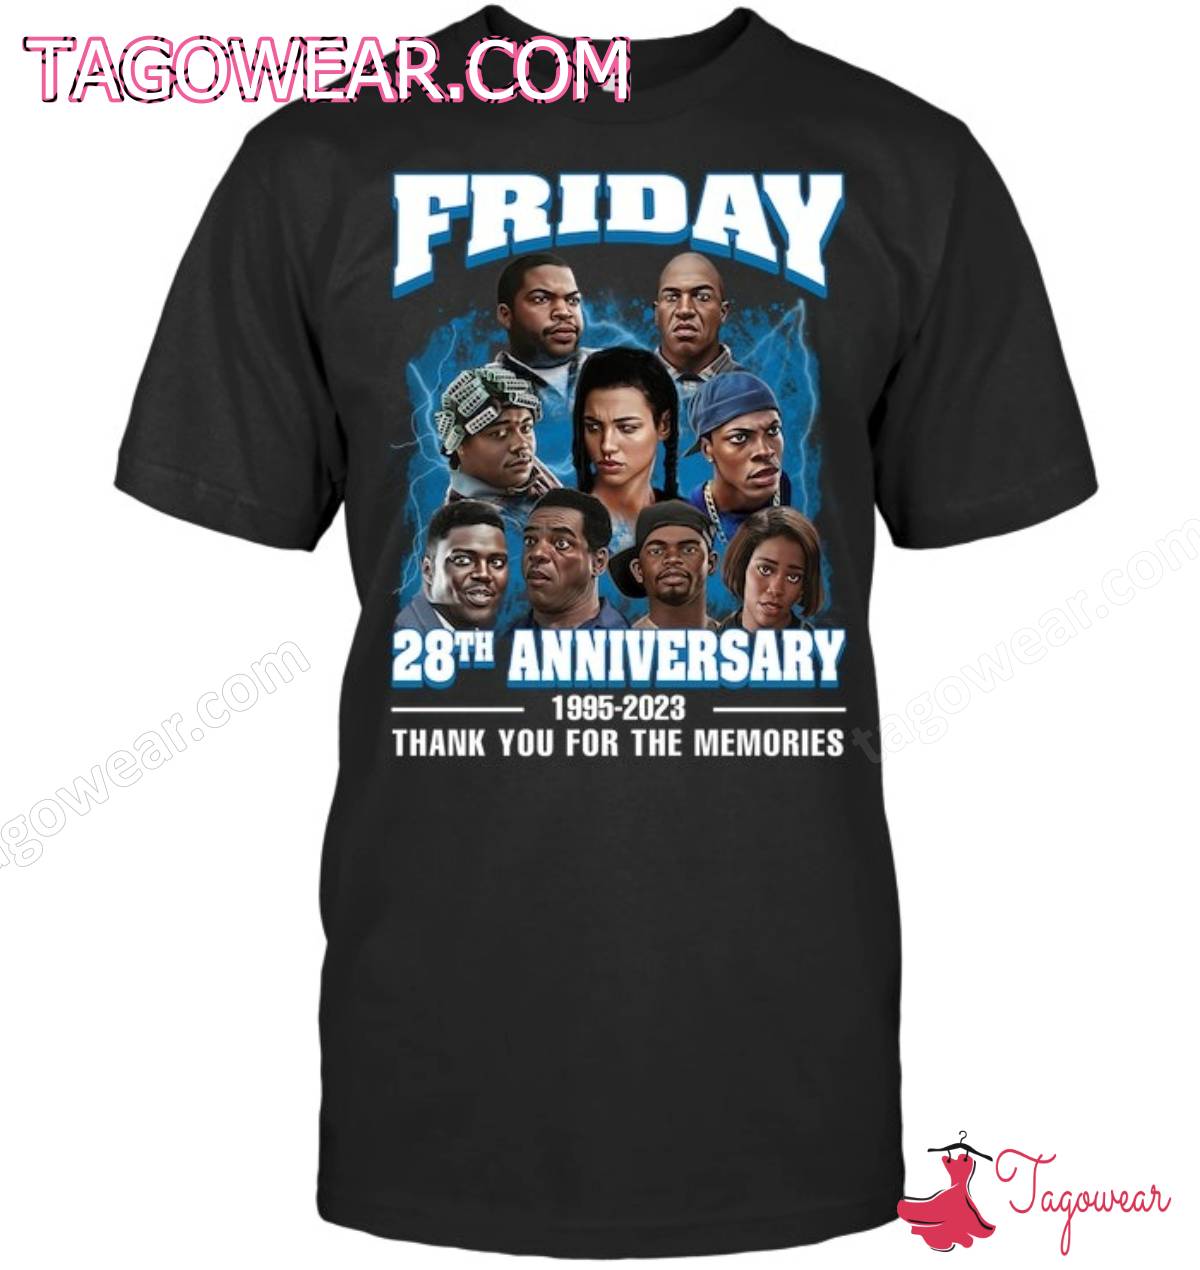 Friday 28th Anniversary 1995-2023 Thank You For The Memories Shirt